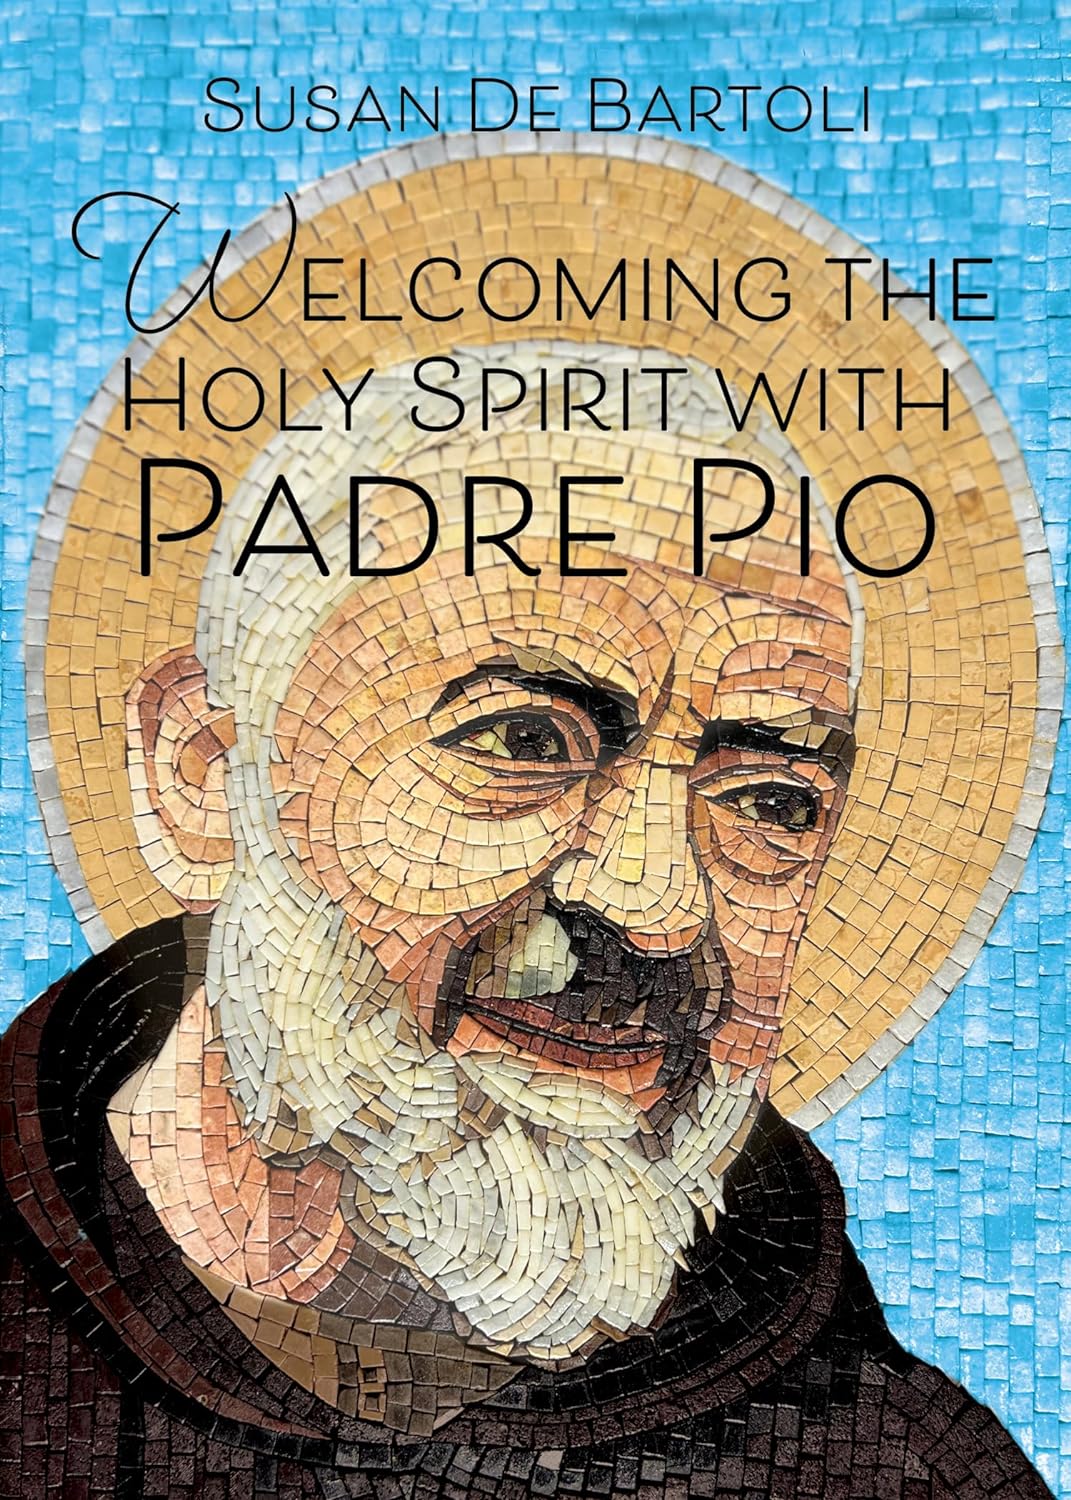 Welcoming the Holy Spirit with Padre Pio - larger-1